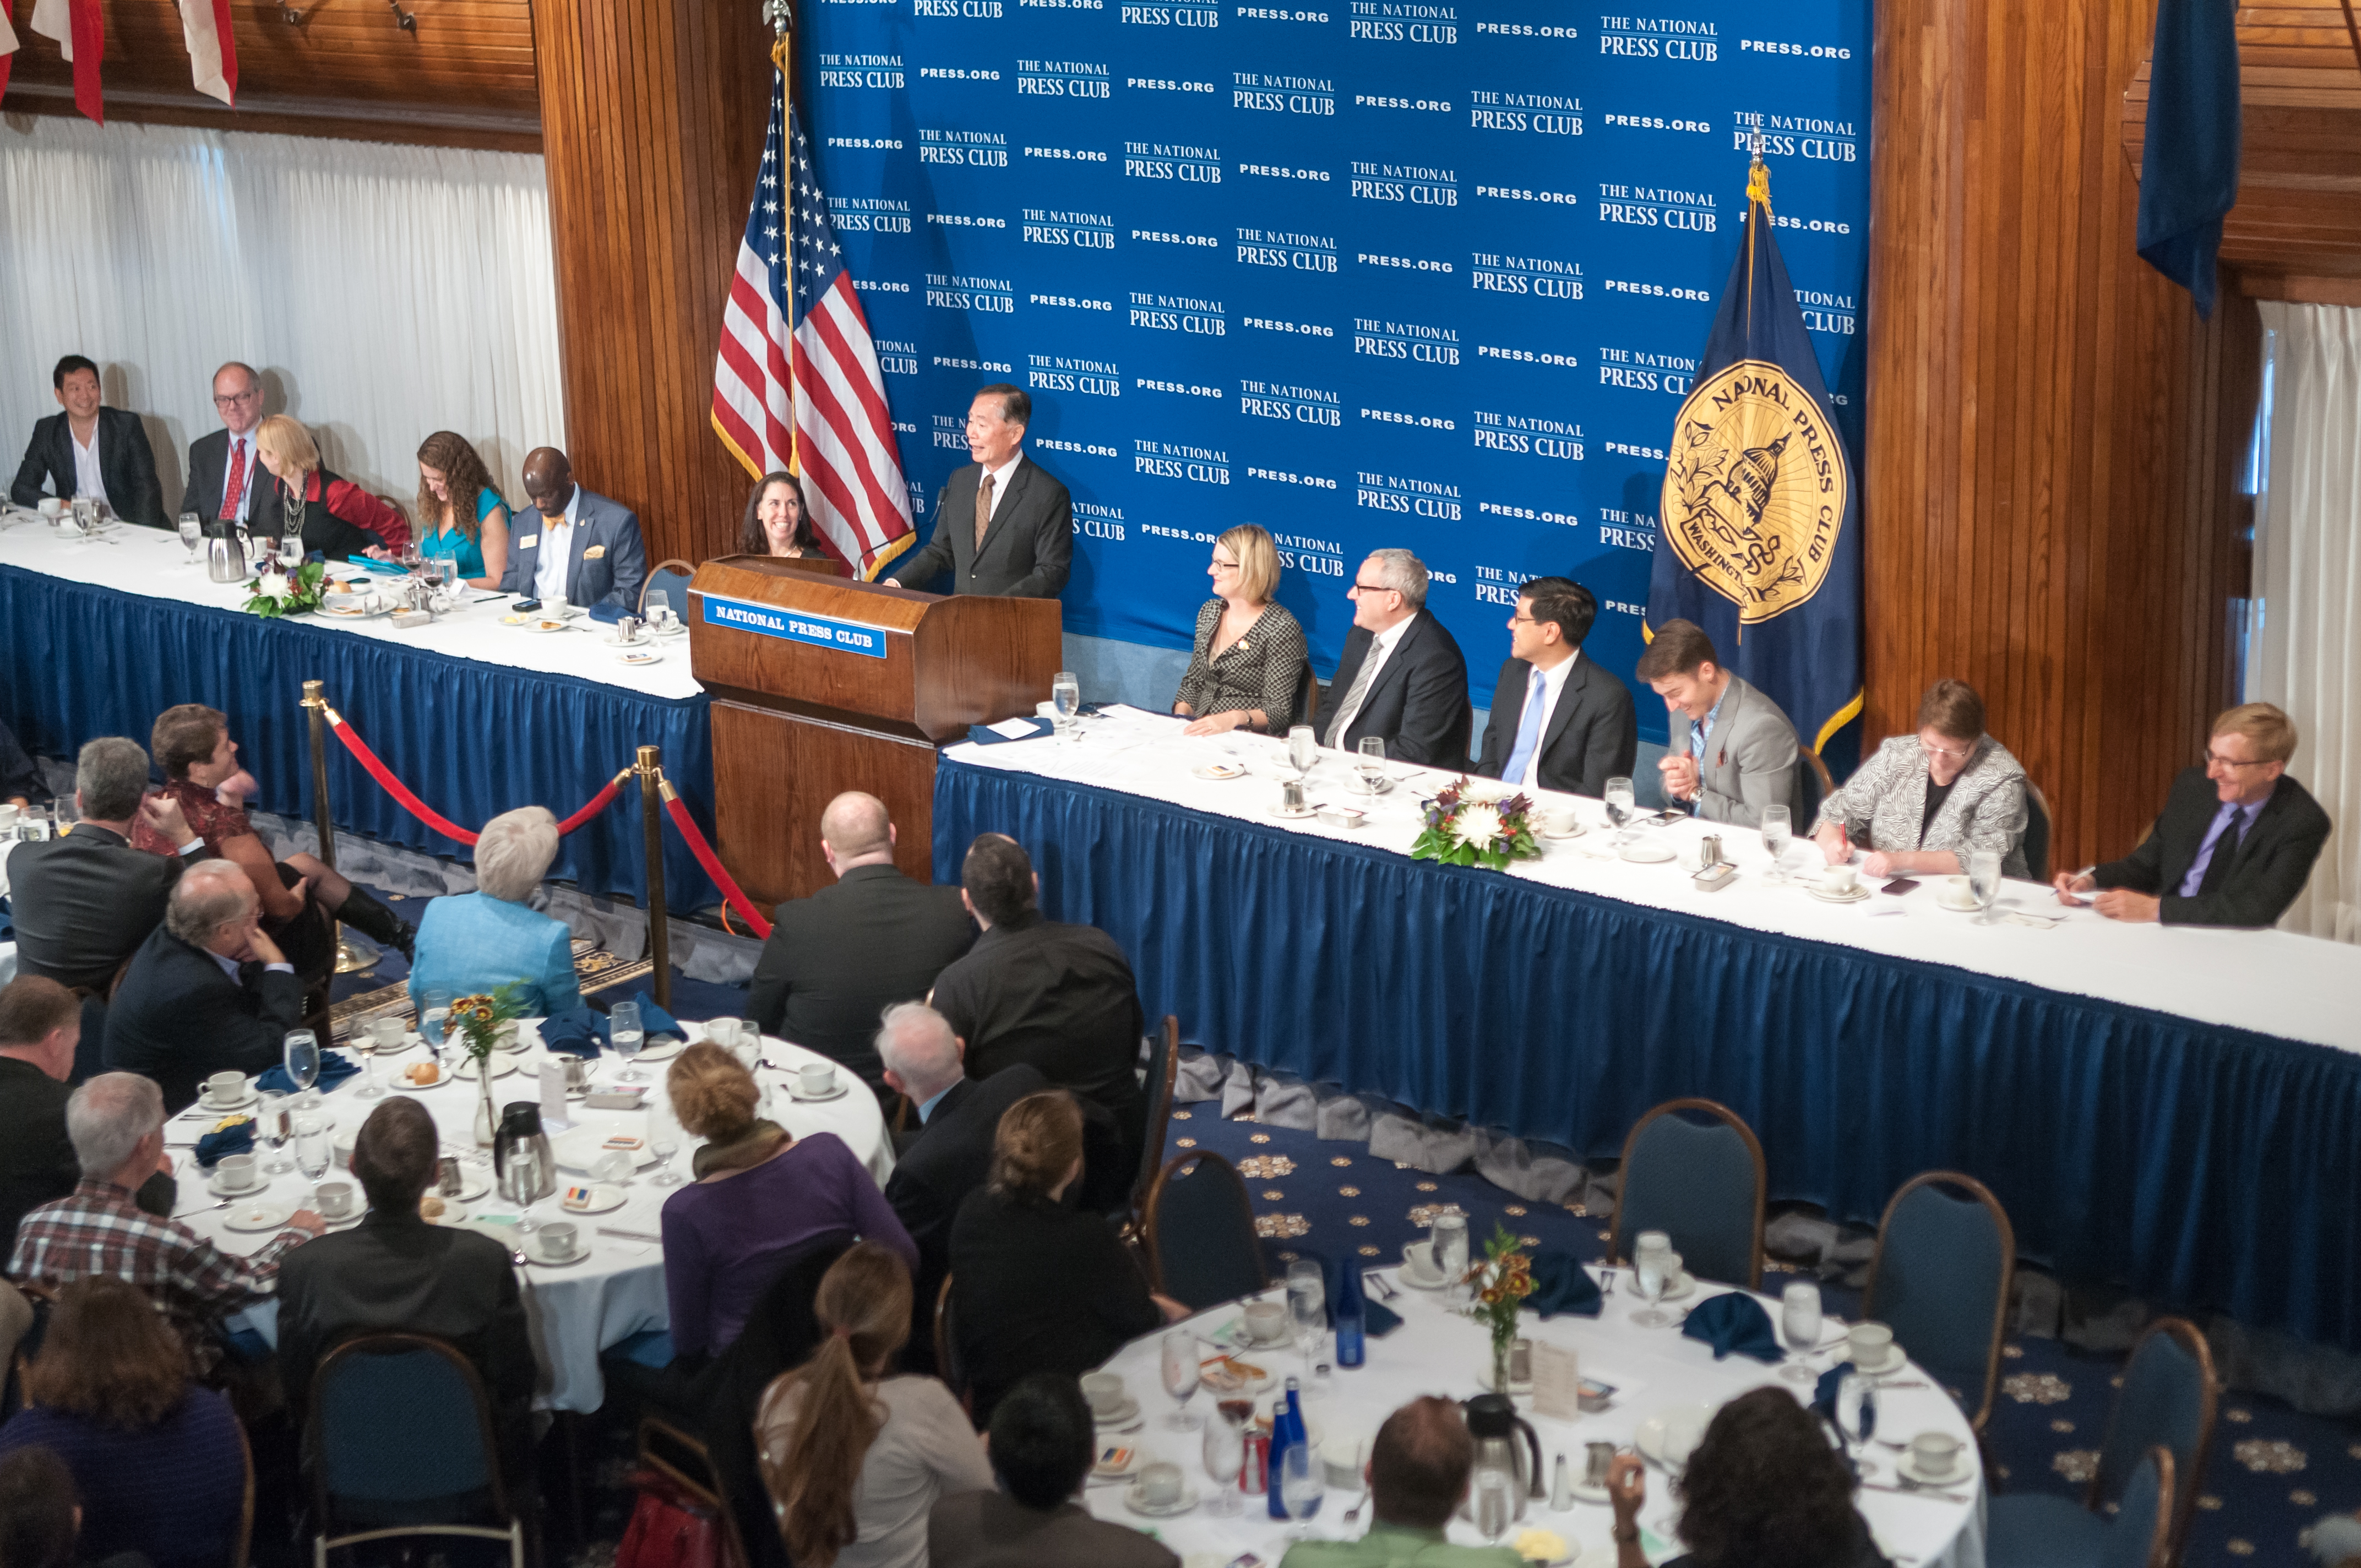 George Takei discusses LGBT issues at a National Press Club Luncheon, October 18, 2013.